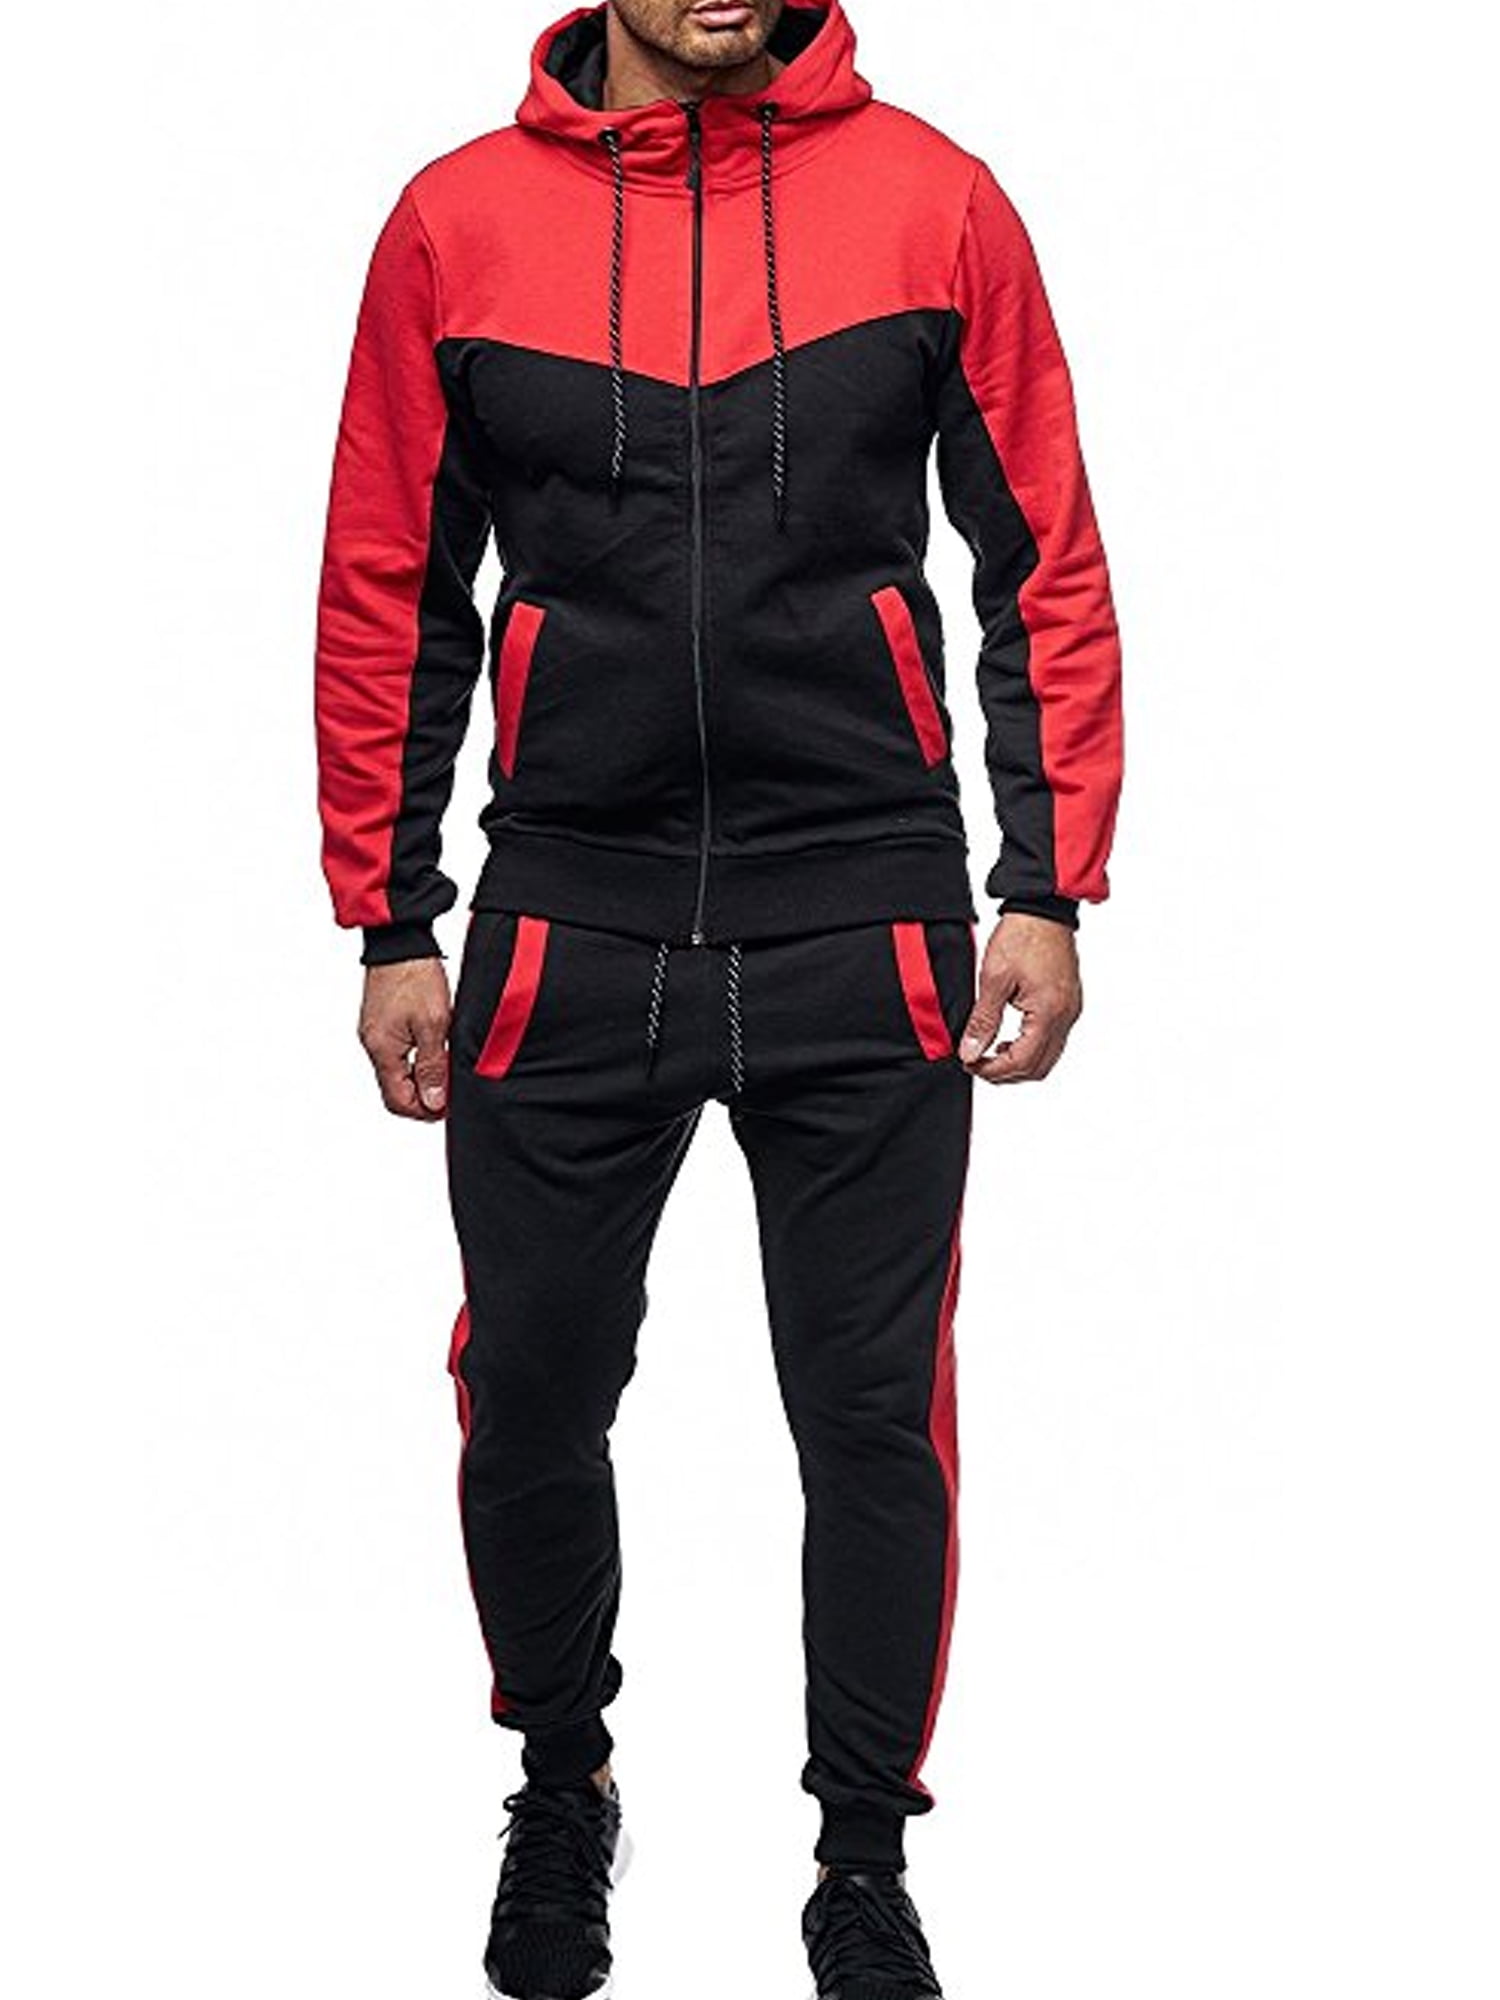 New Mens Contrast Cord Hooded Tracksuit Set Zip Top Gym Jogging Bottoms Suit 